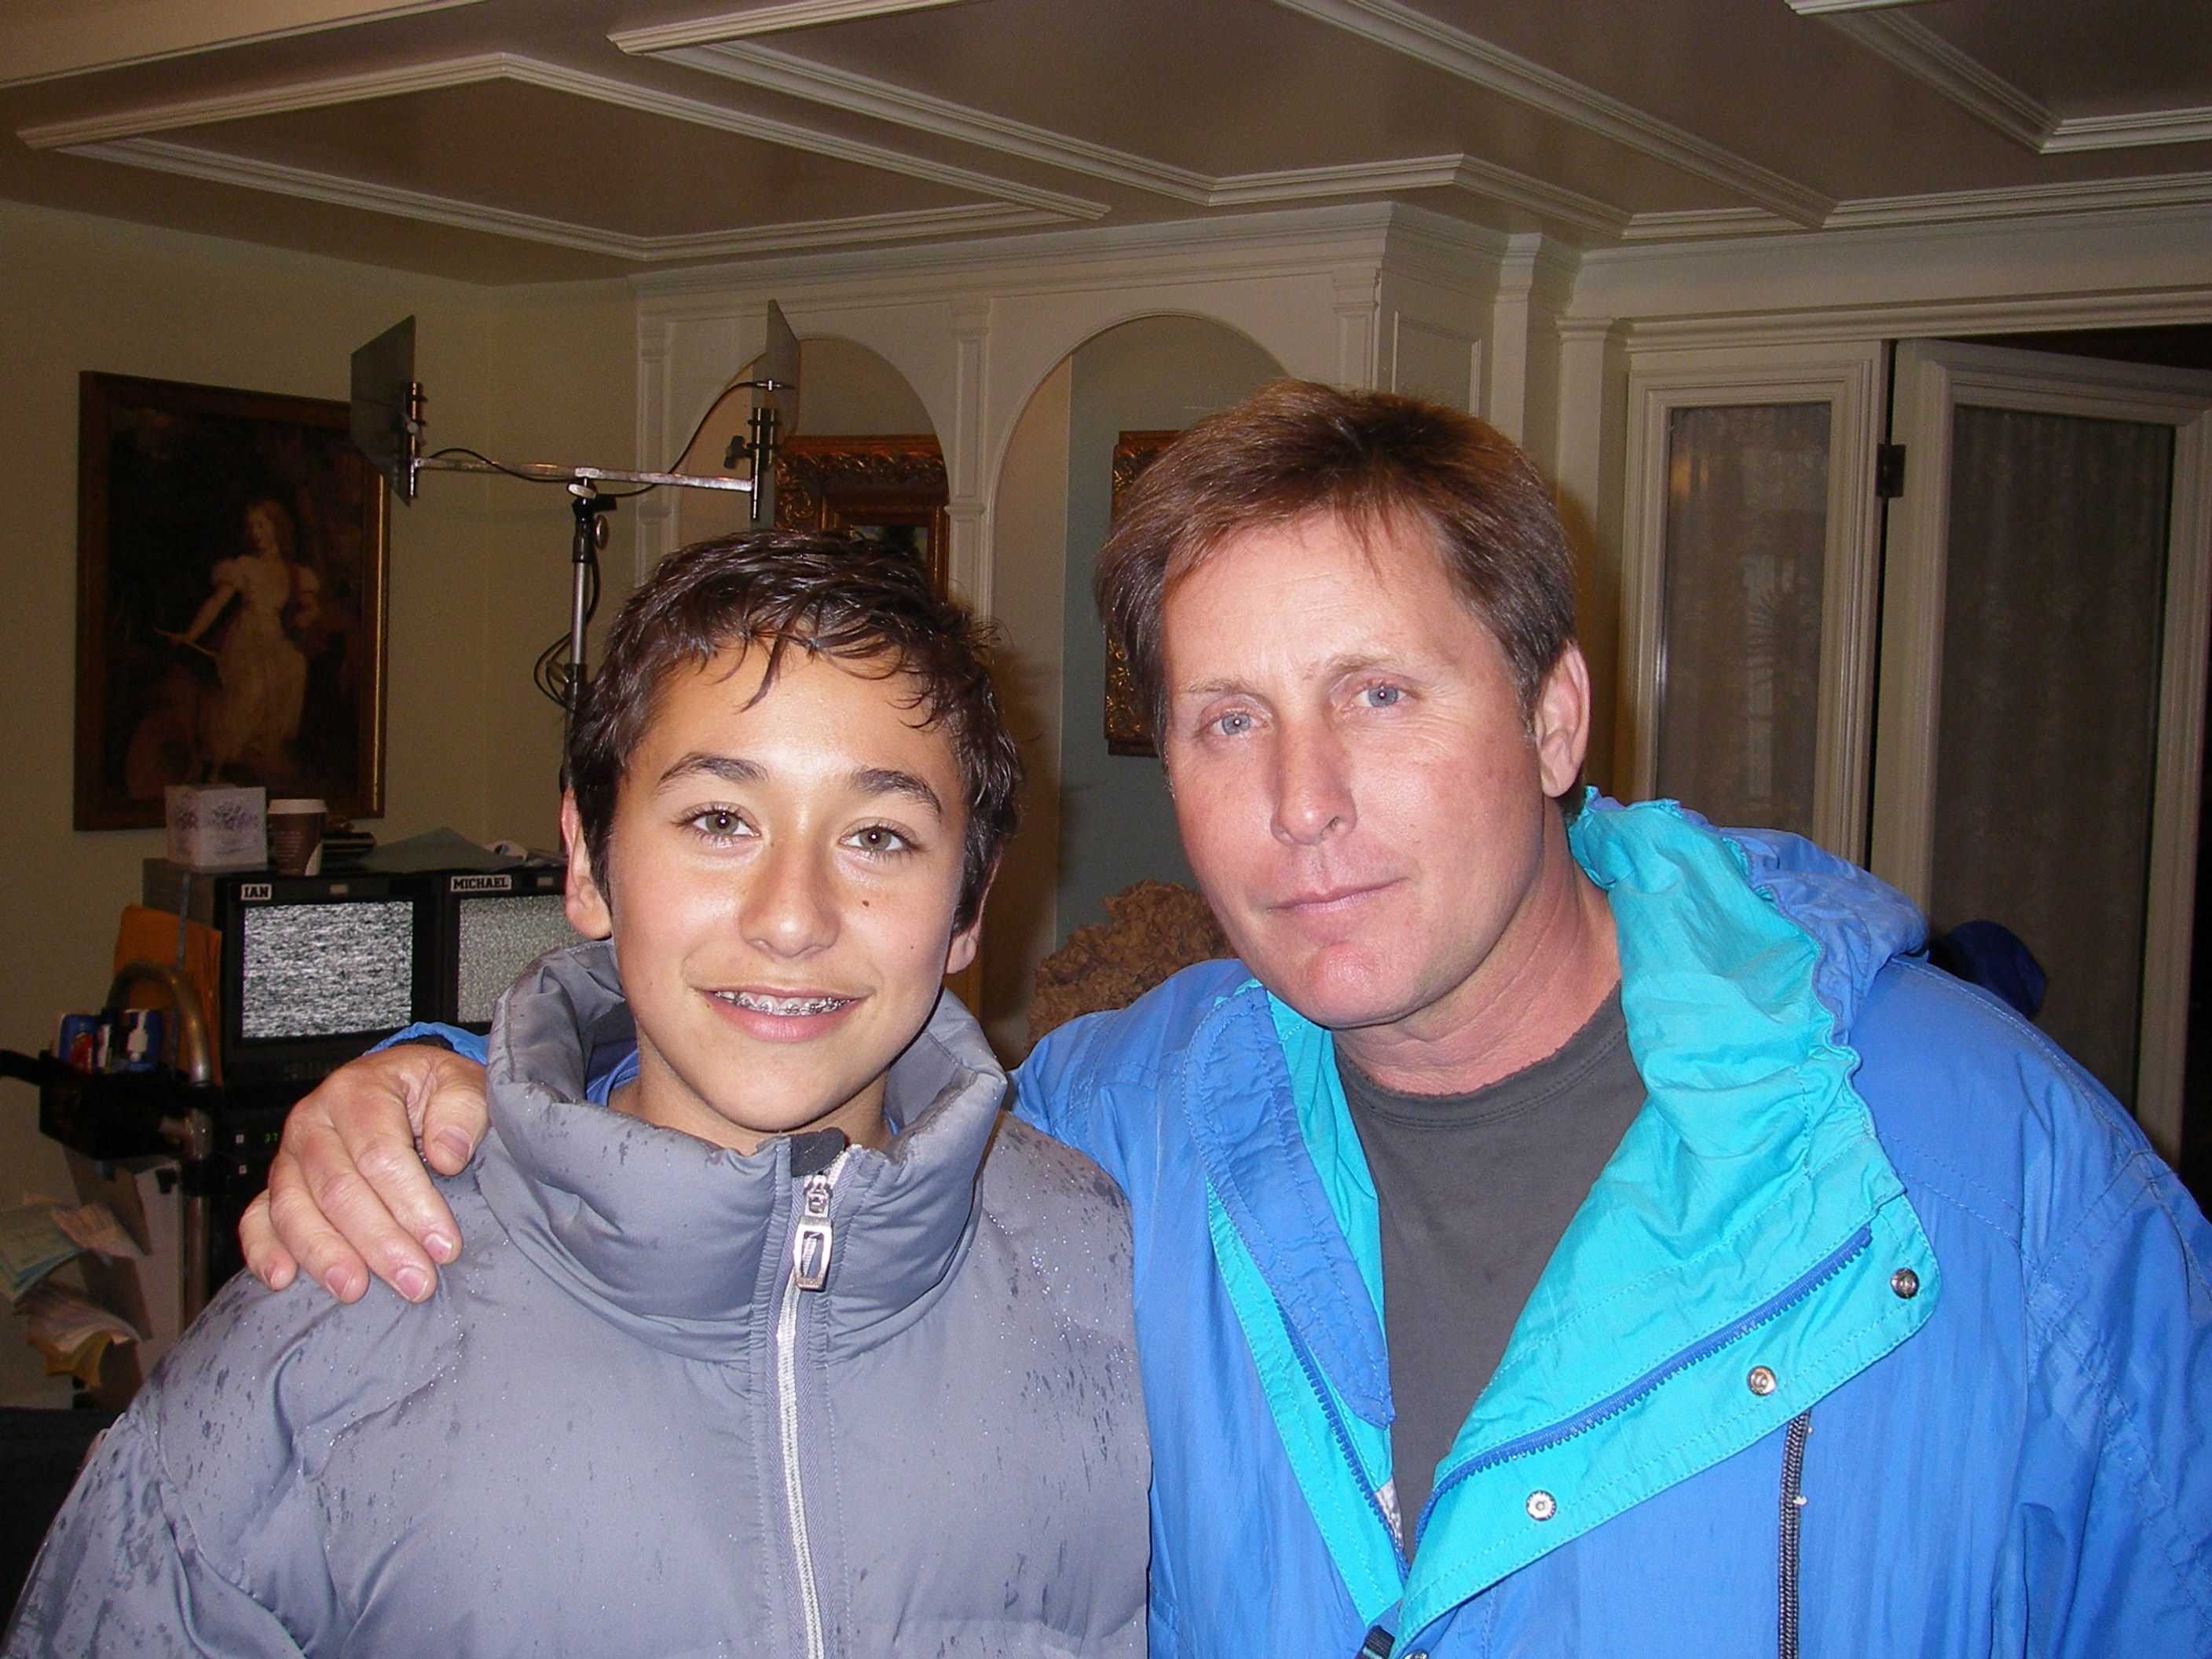 On Set of Numb3rs with Director, Emilio Estevez and Brennen Taylor